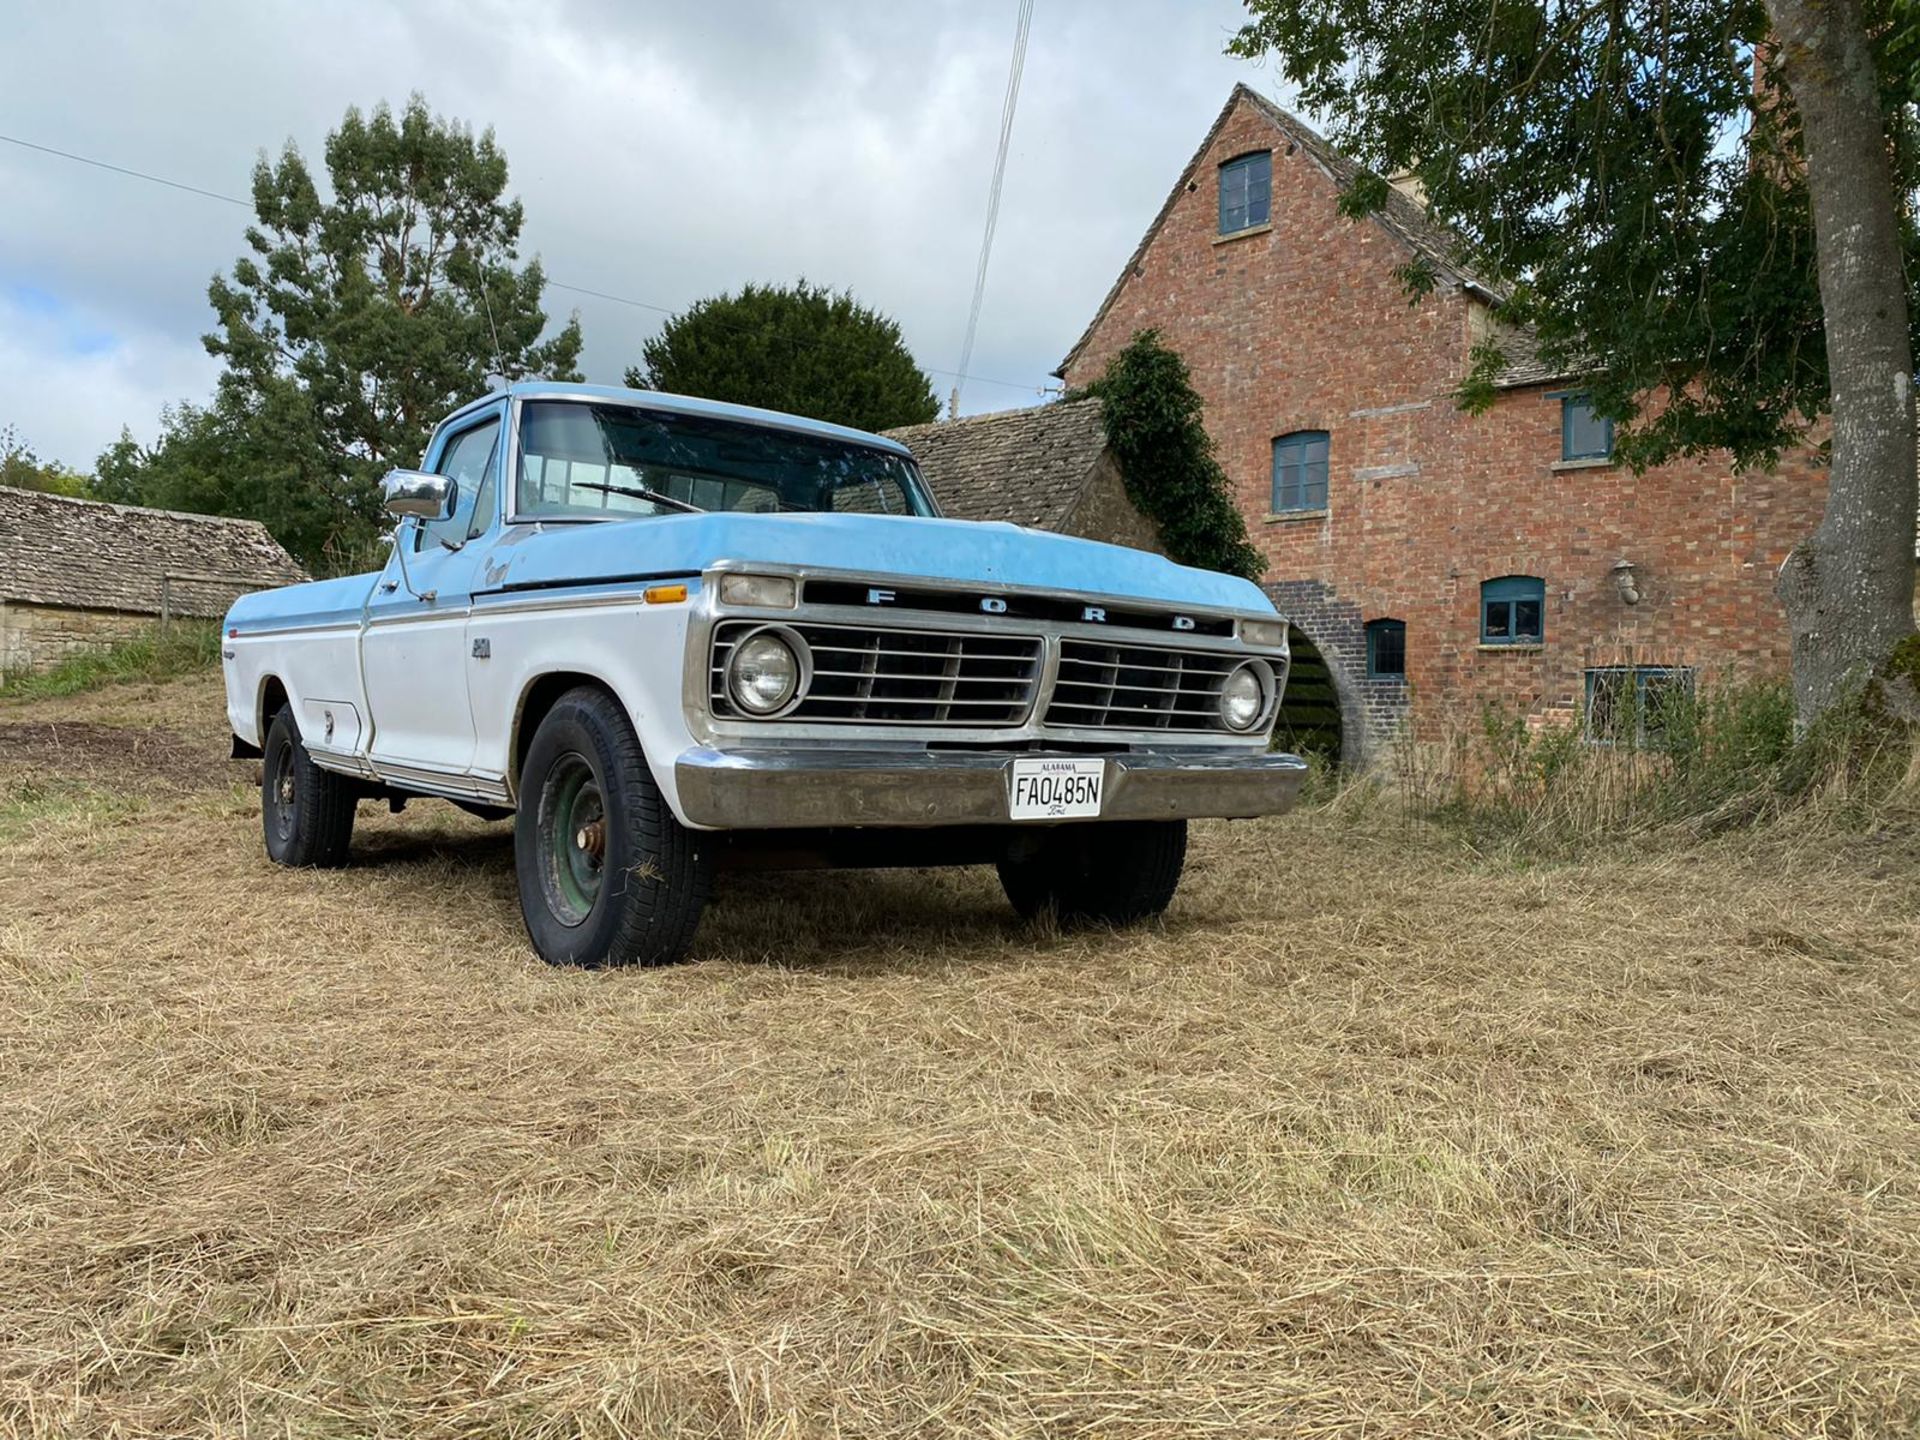 1975 FORD F-250 6.4 (390) V8, 4 SPEED MANUAL, HAS JUST BEEN REGISTERED, NEW BENCH SEAT *NO VAT* - Image 2 of 22